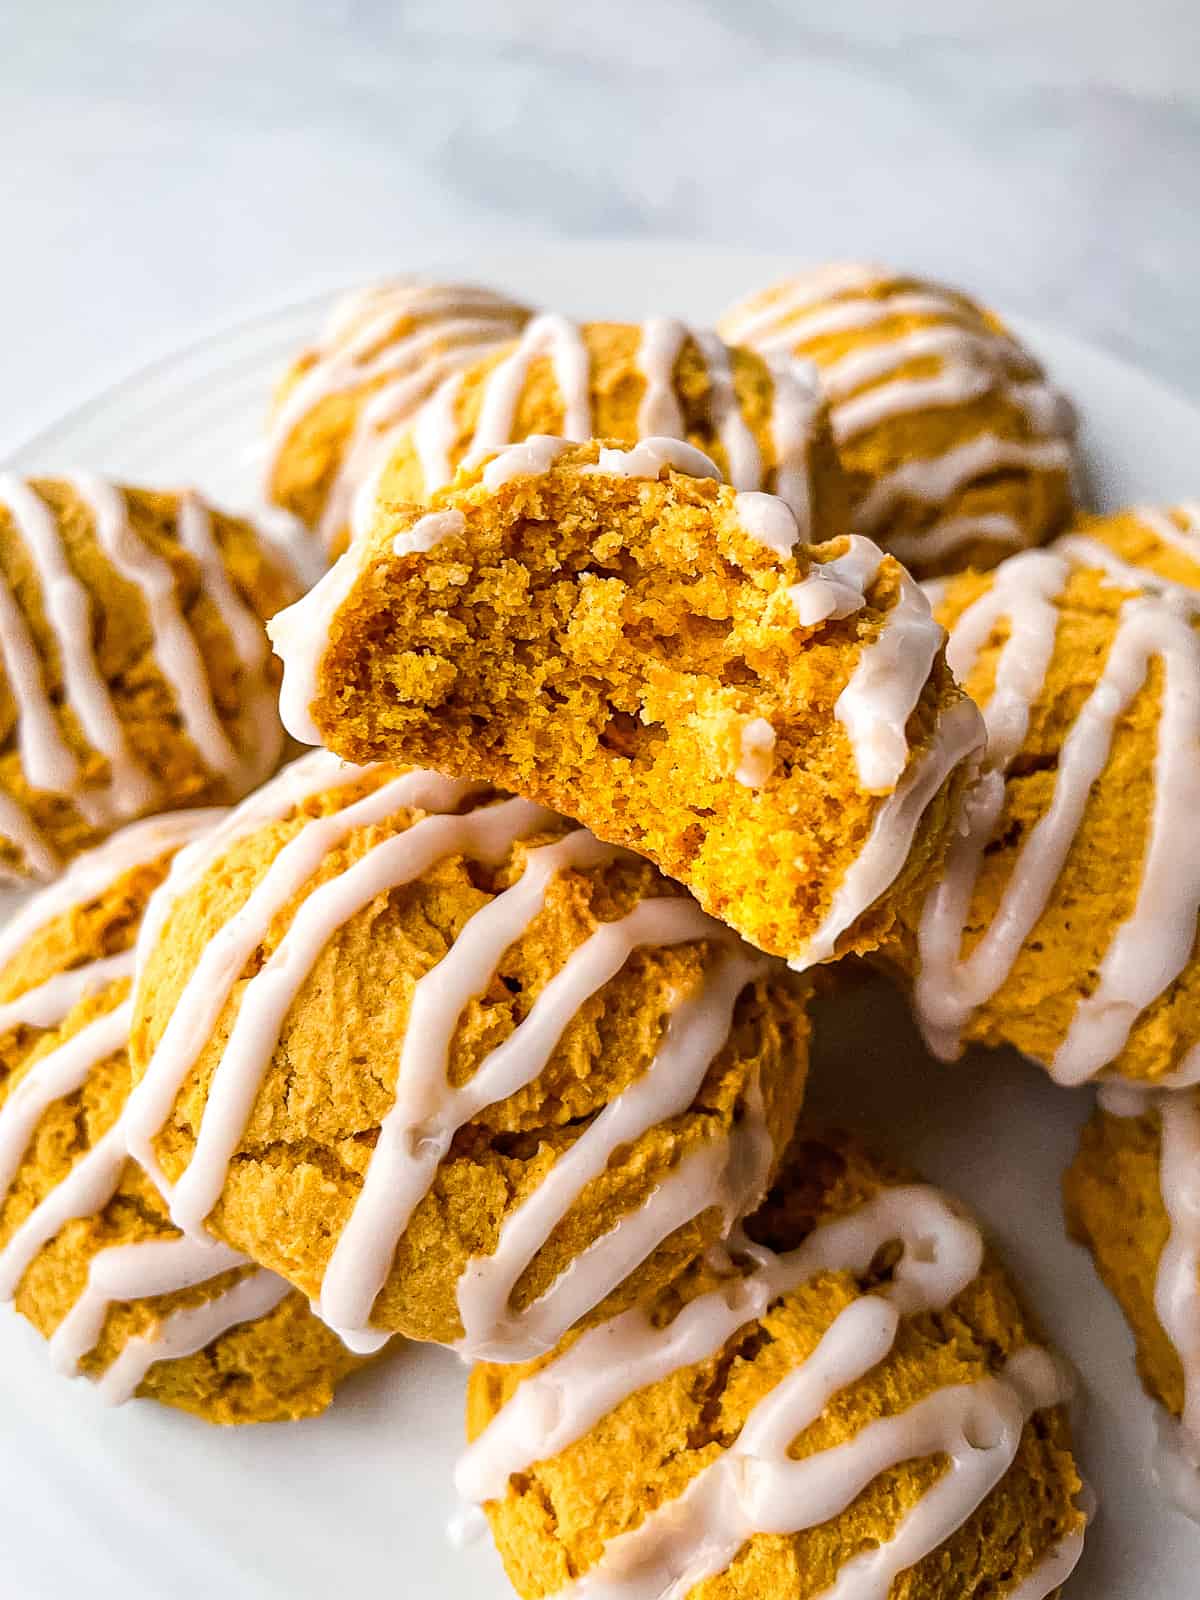 Gluten-free pumpkin cookies on a plate. One is cut in half to show texture.